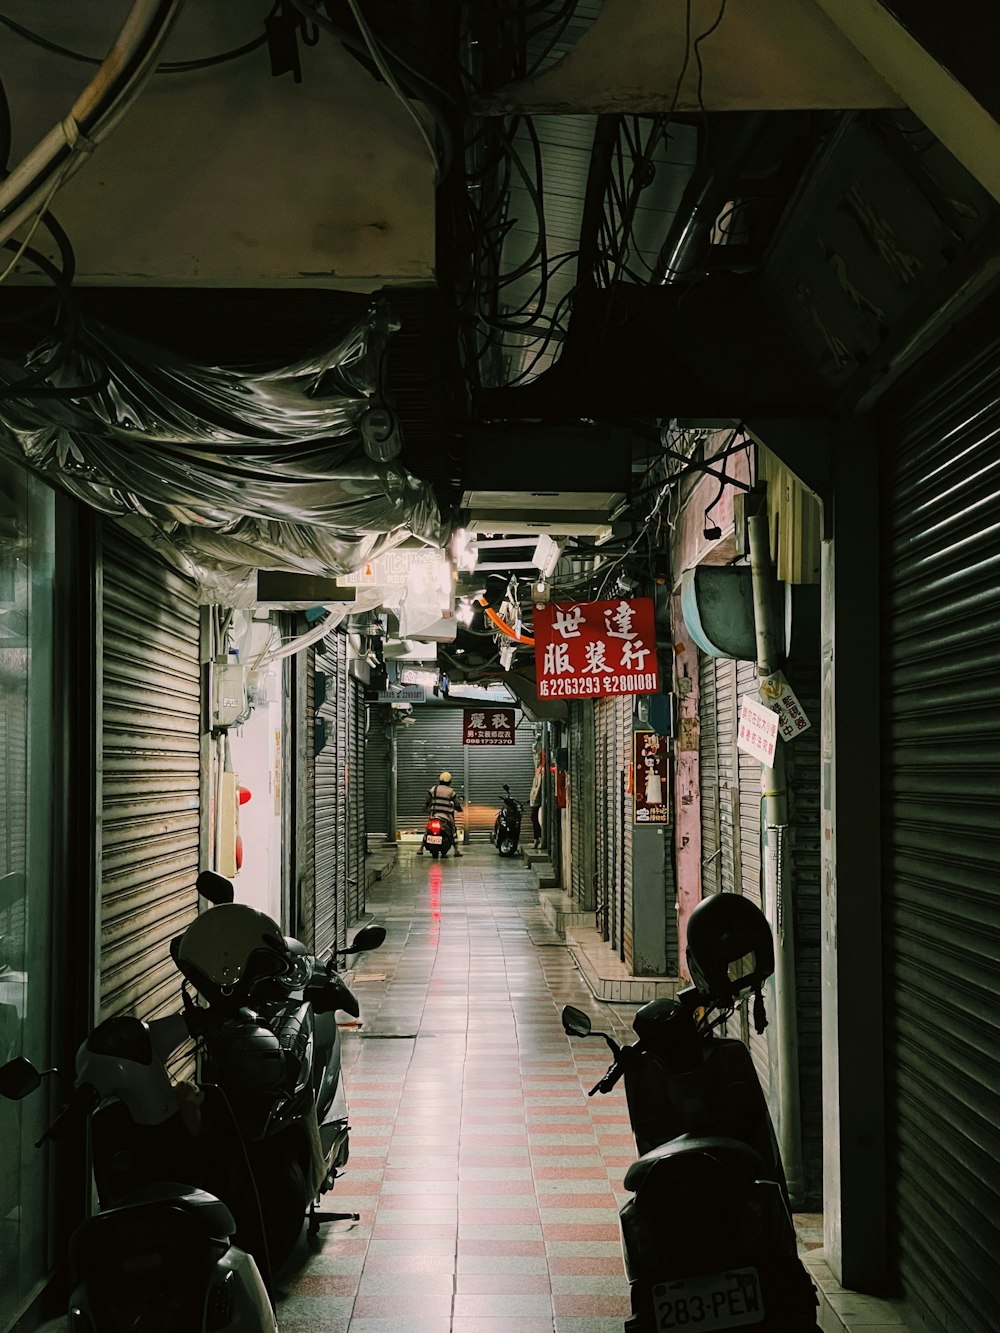 a long hallway with motorcycles parked on the side of it